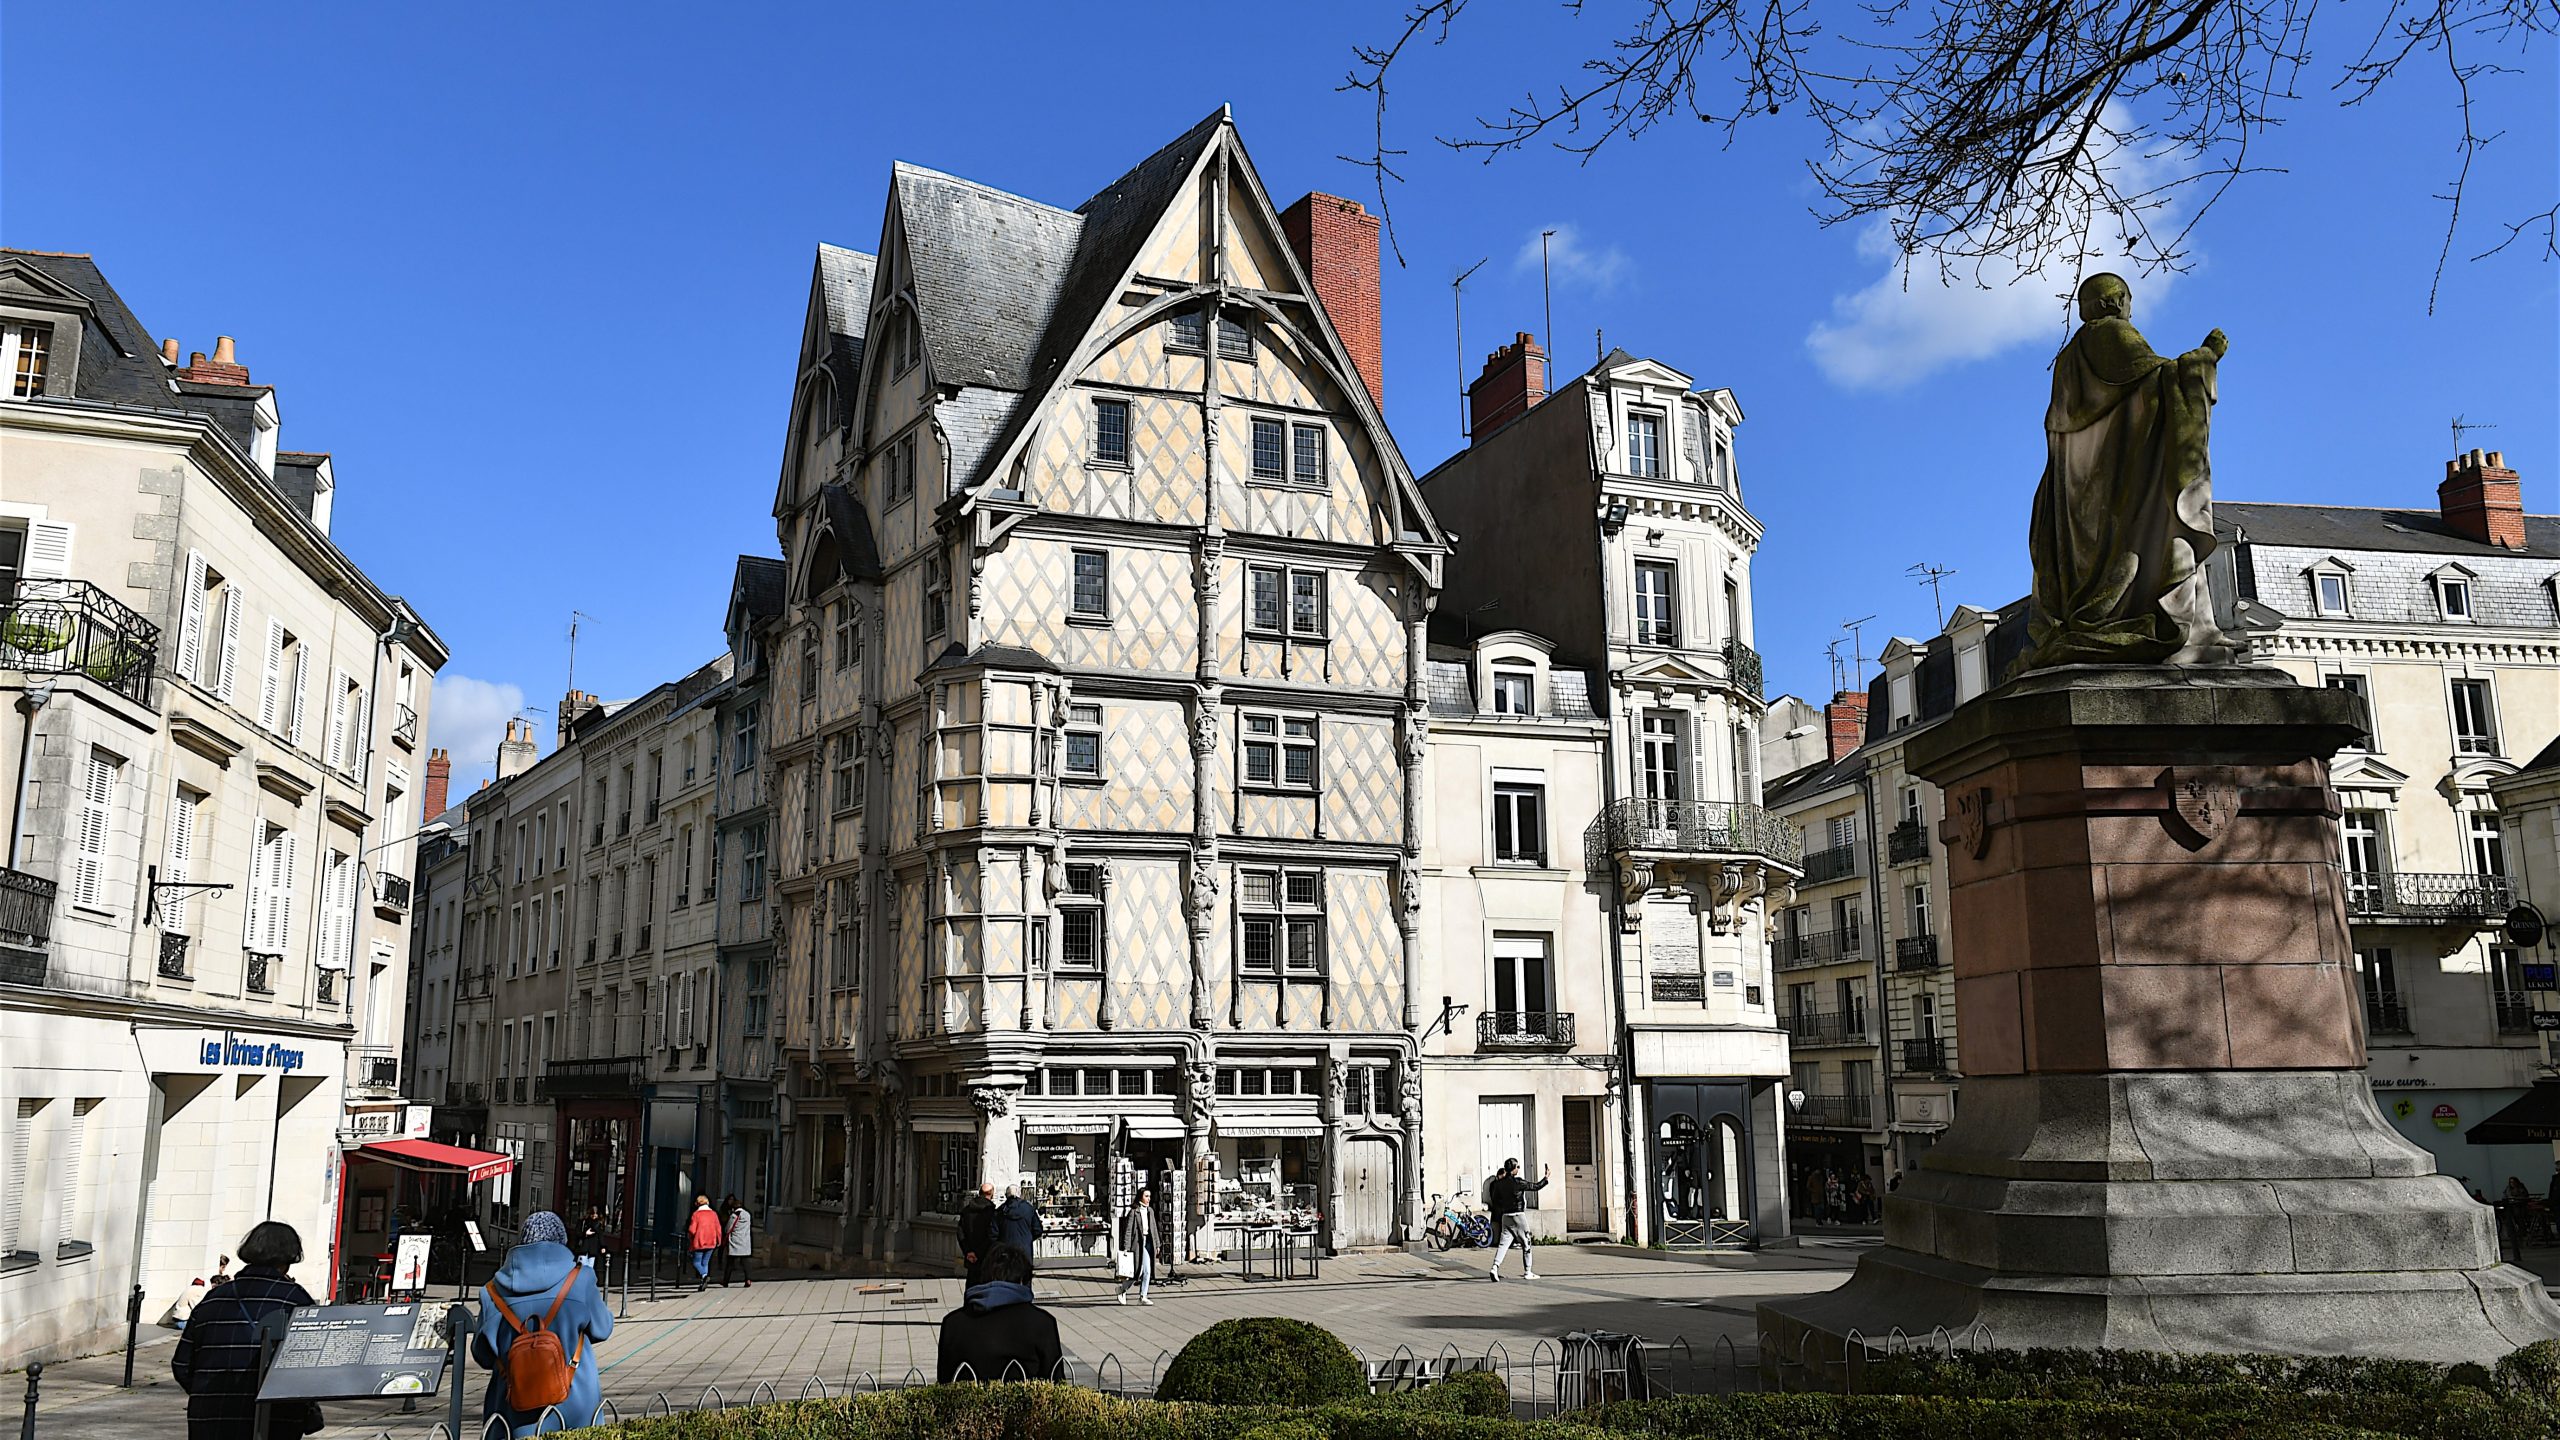 Buildings and a statue in Angers, France